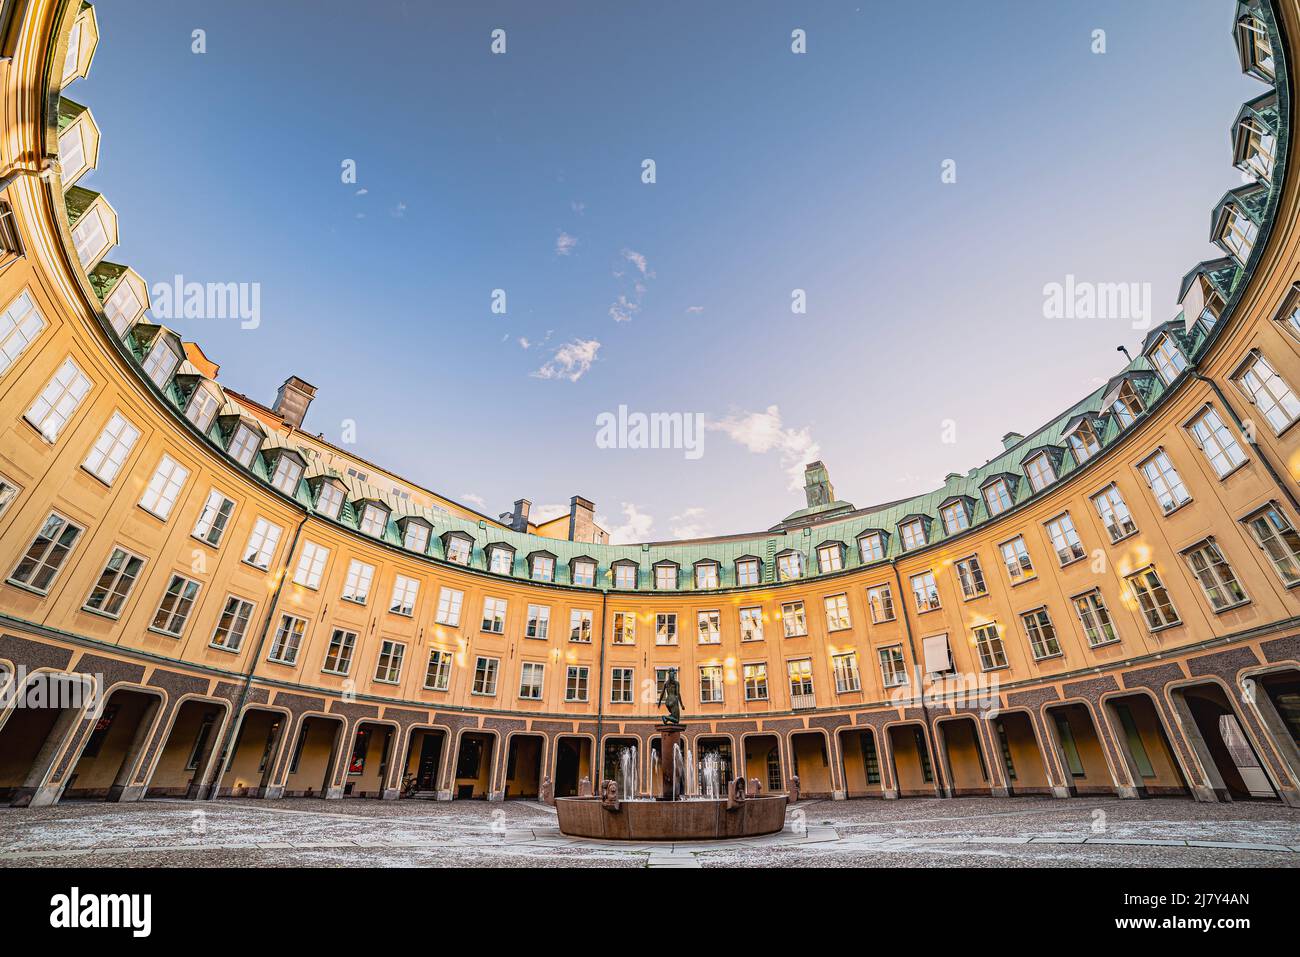 Neat round shaped building wrapping a small cobbled square. Fine elegant architecture with circular arched structure surrounding a tiny stately plaza Stock Photo